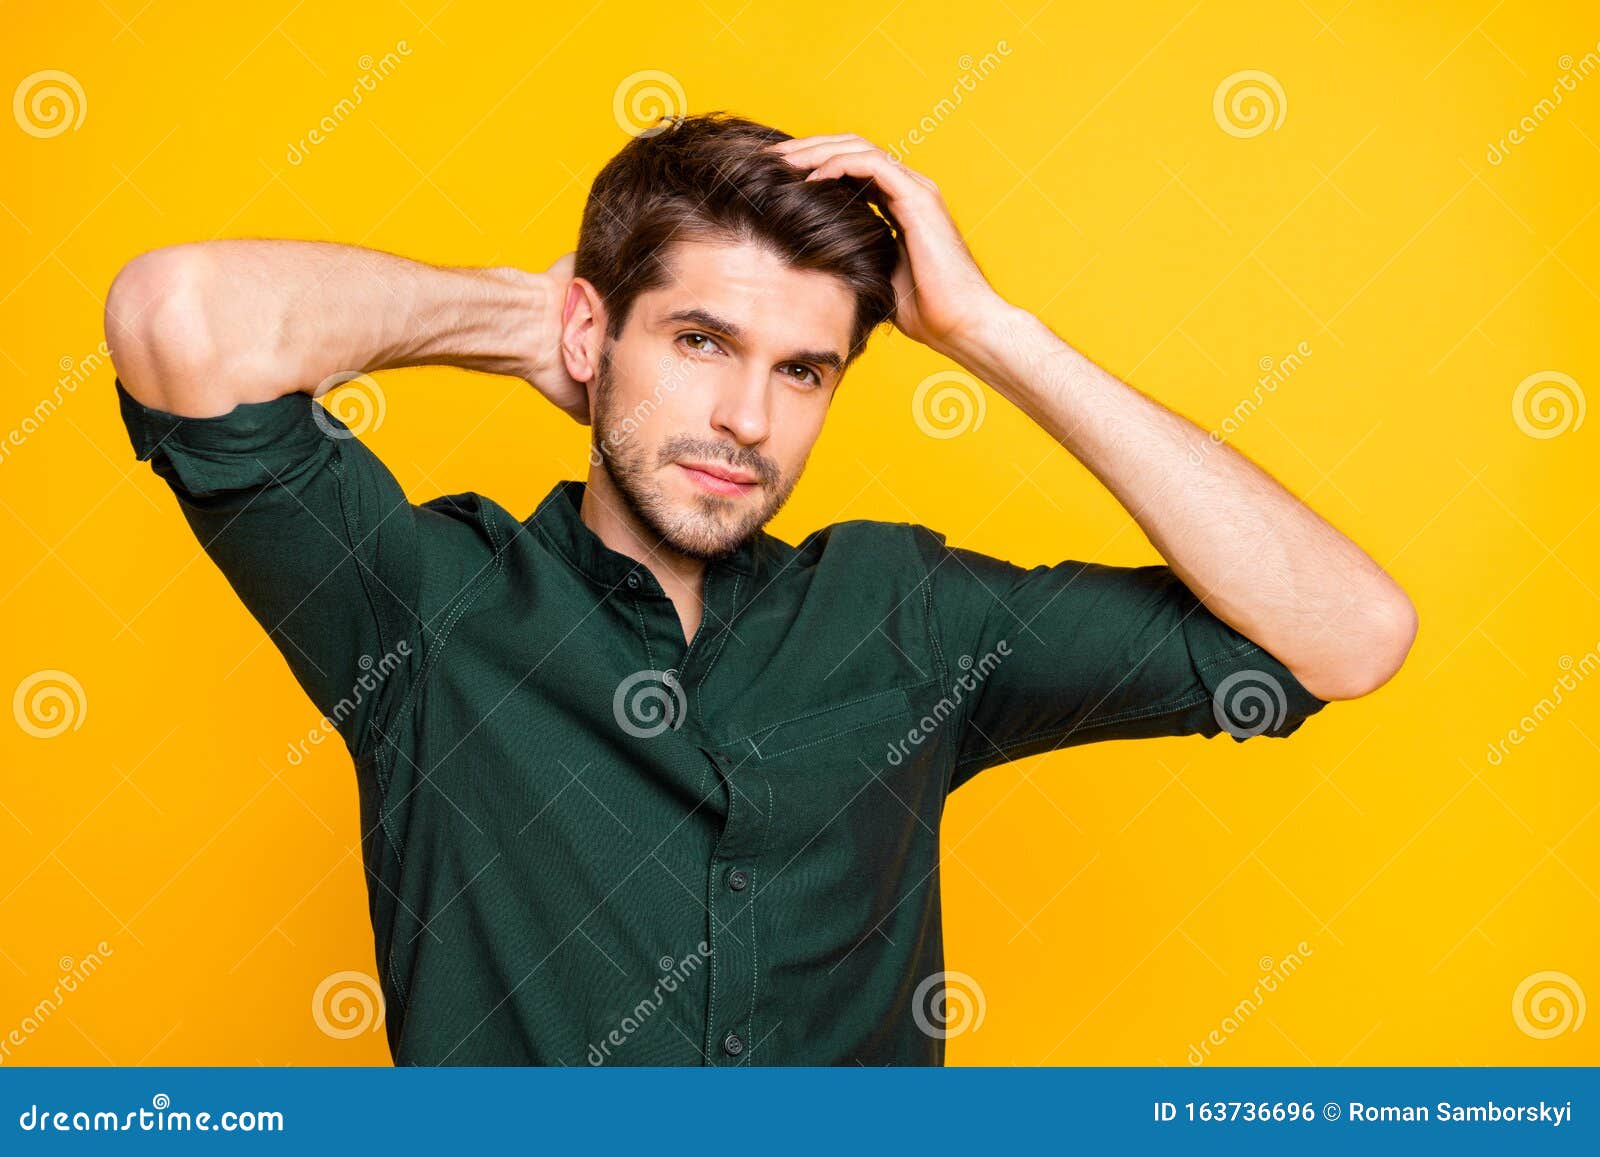 portrait of serious guy had bought new anti dander effect shampoo touch his hair look mirror feel thoughtful wear casual